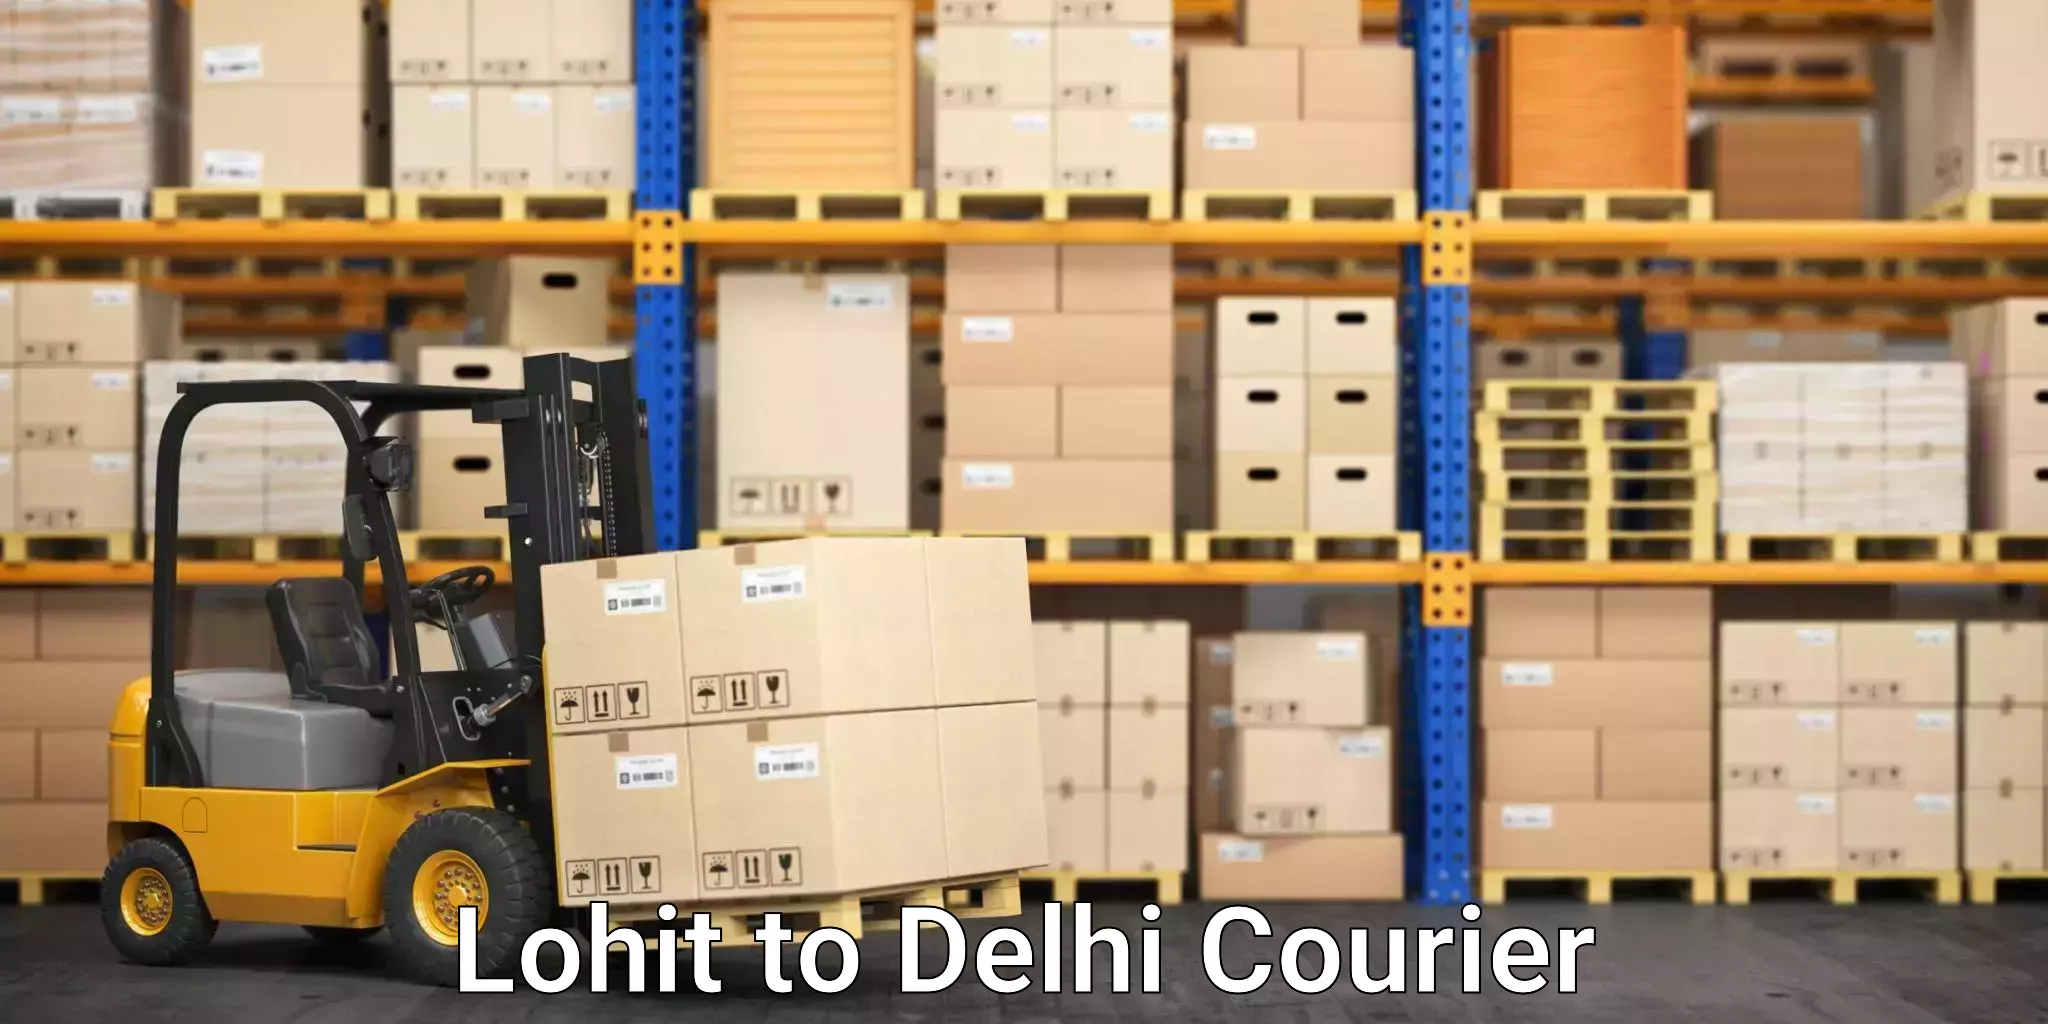 Courier service efficiency Lohit to Subhash Nagar